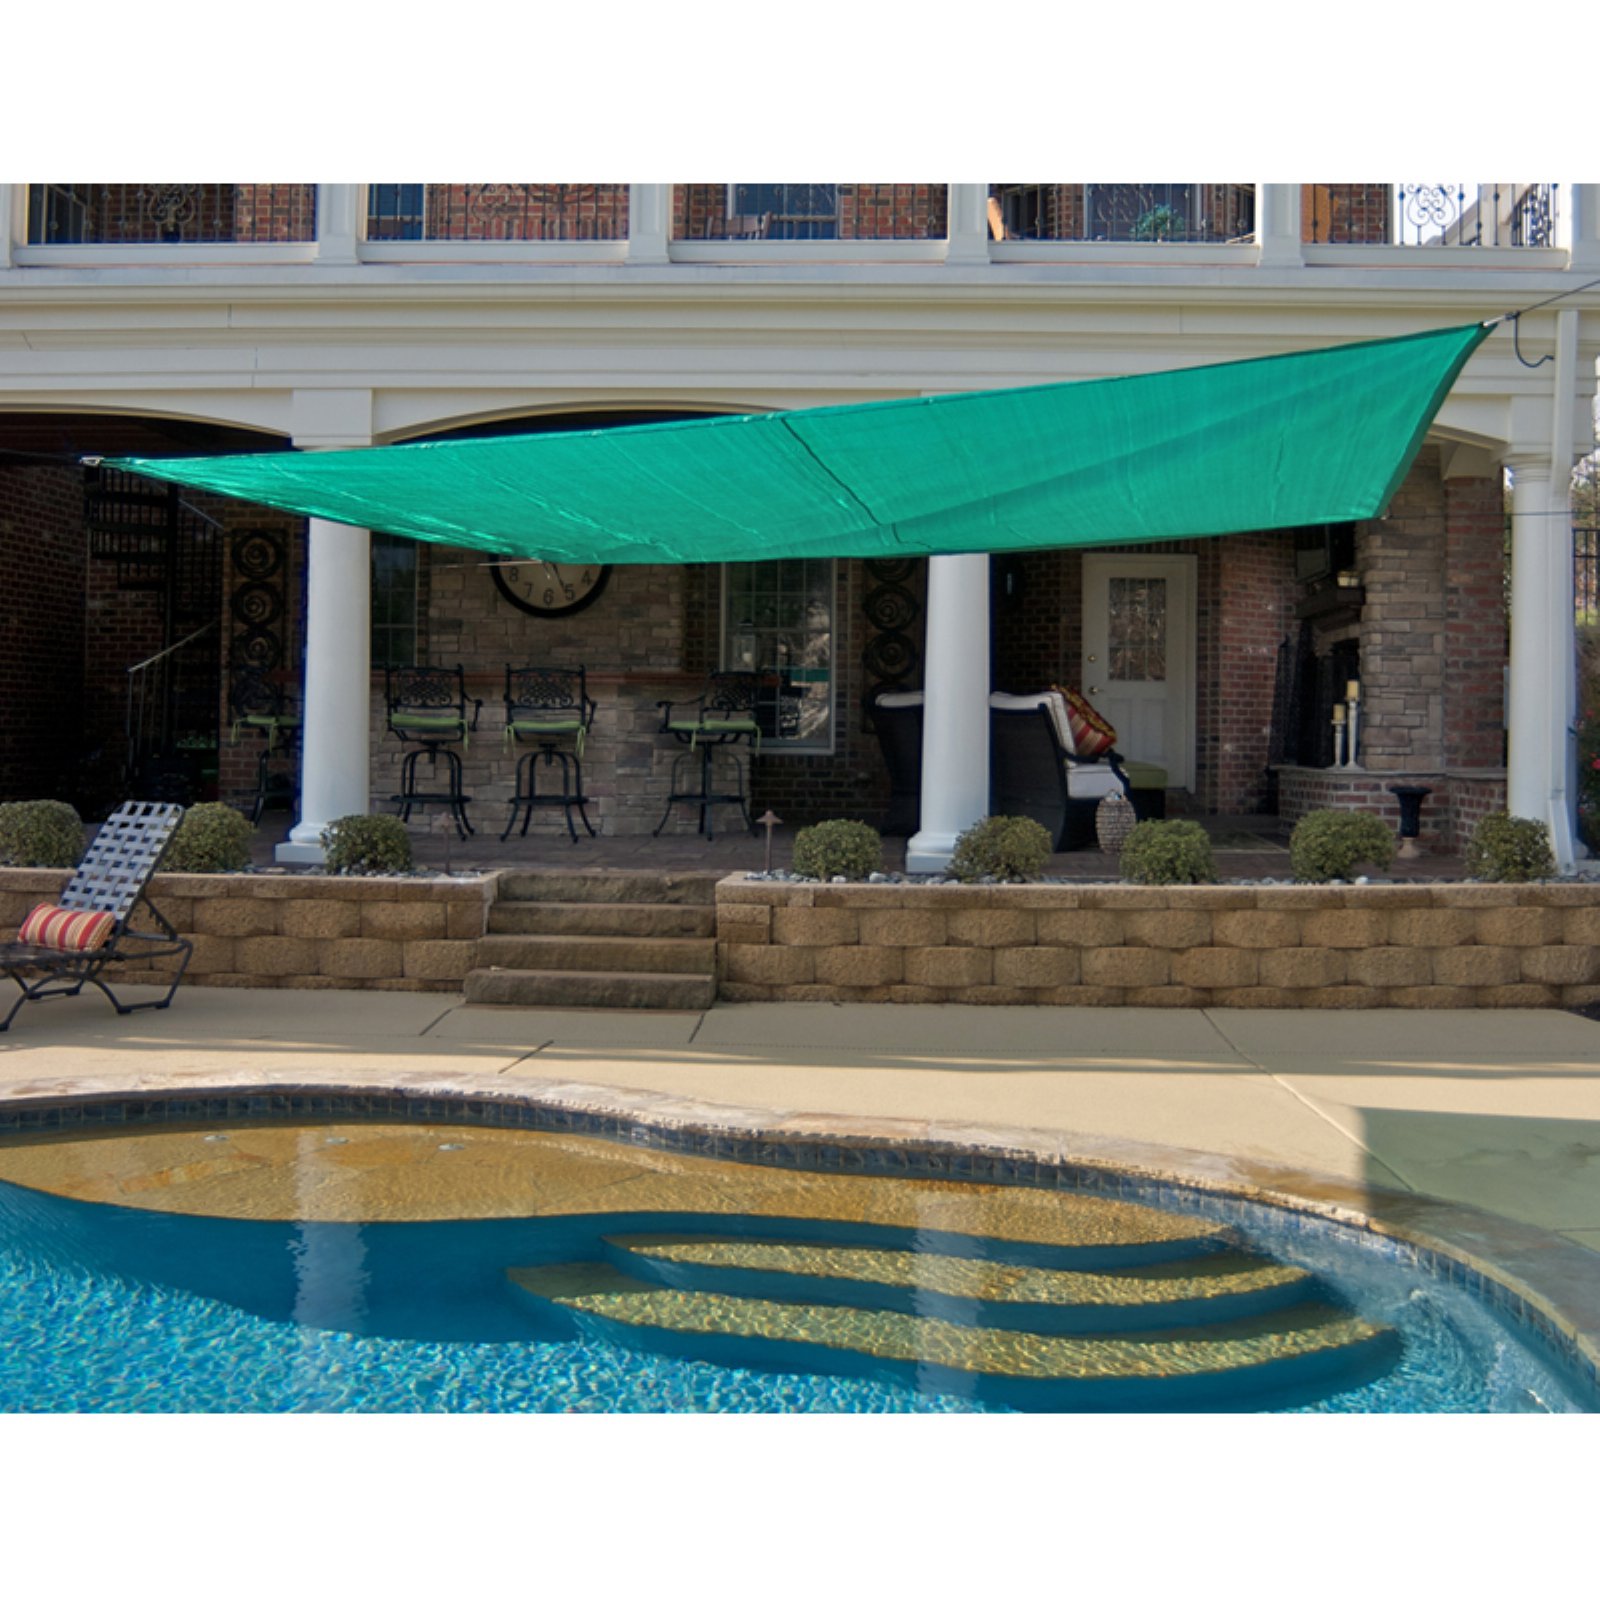 King Canopy 10' Triangle Sun Shade Sail in Green - image 1 of 8